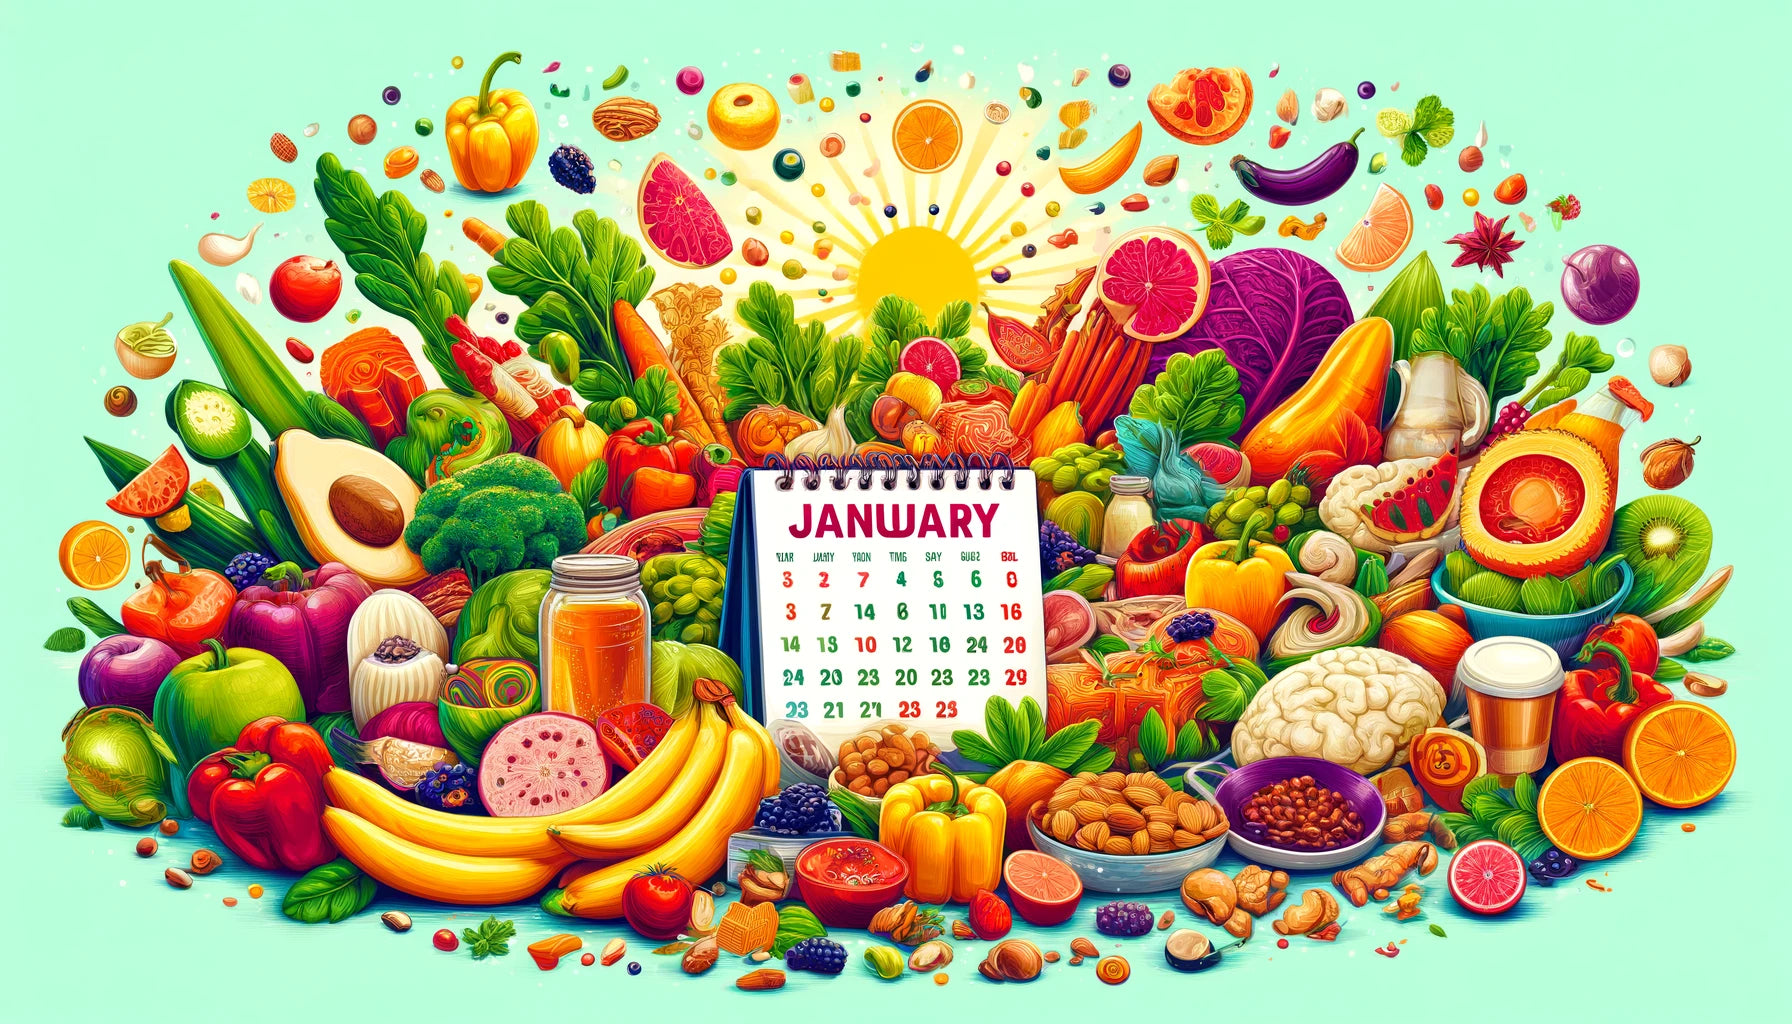 VEGANUARY: Your Ultimate Guide To A Healthy and Stress Free Vegan January